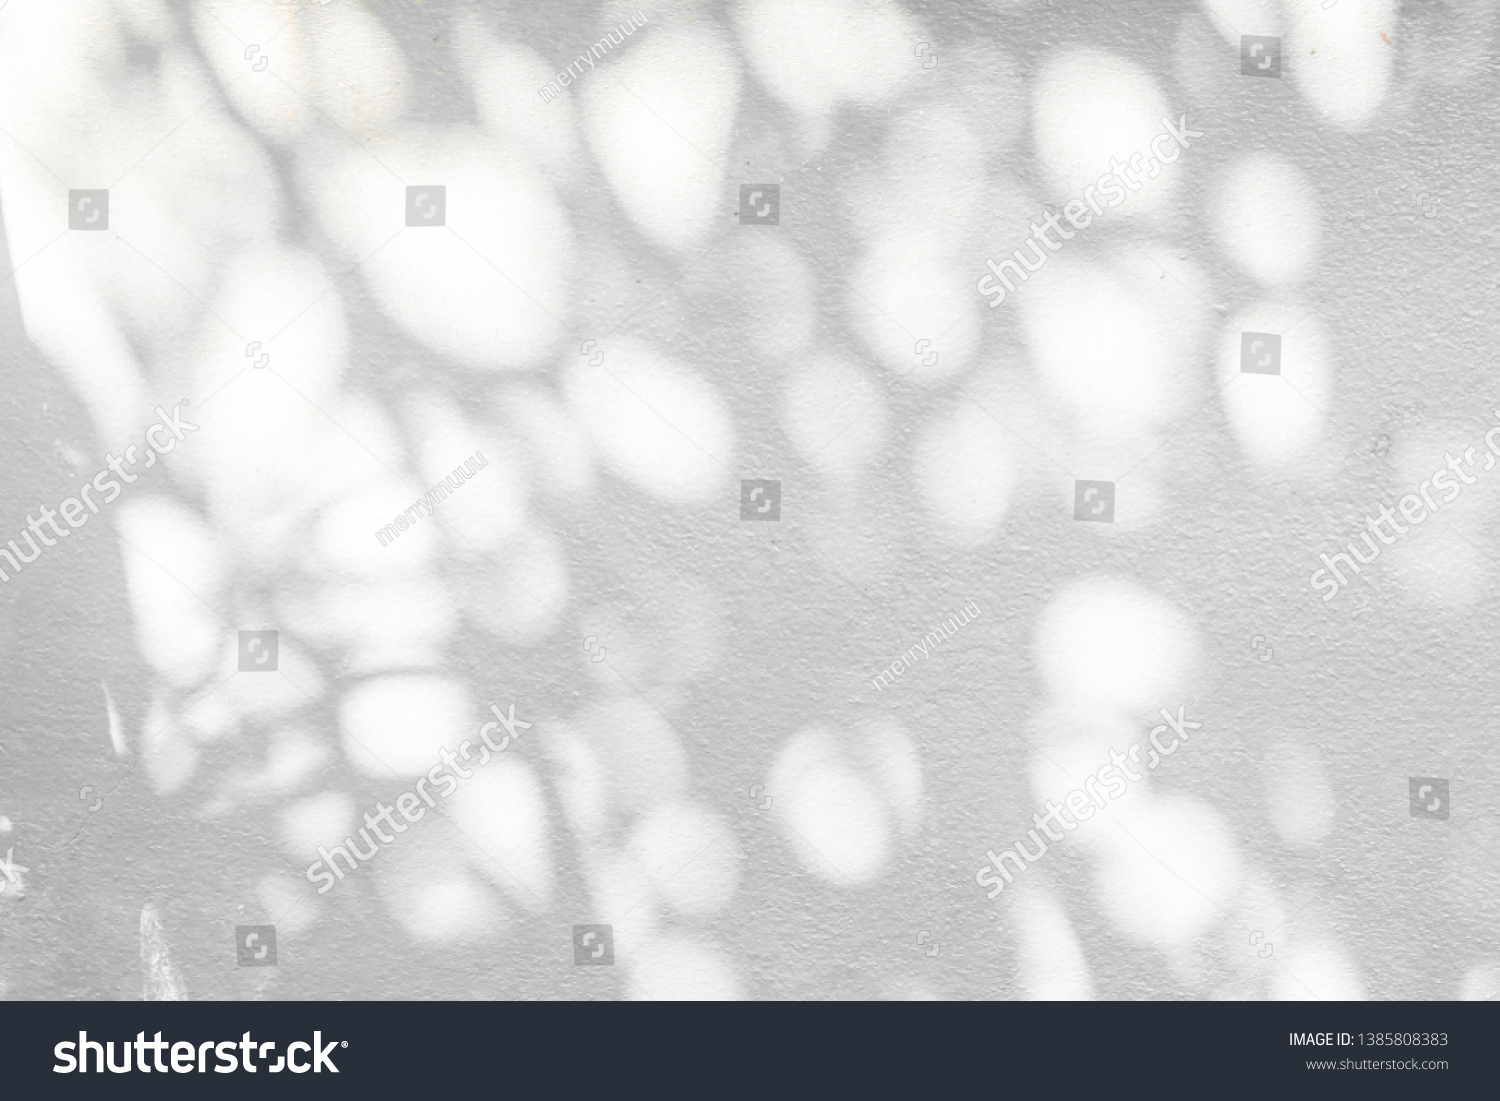 Abstract tree and leaves shadow background with light bokeh,  arts of natural leaves tree branch pattern falling on white wall texture for background and wallpaper, black and white monochrome tone #1385808383